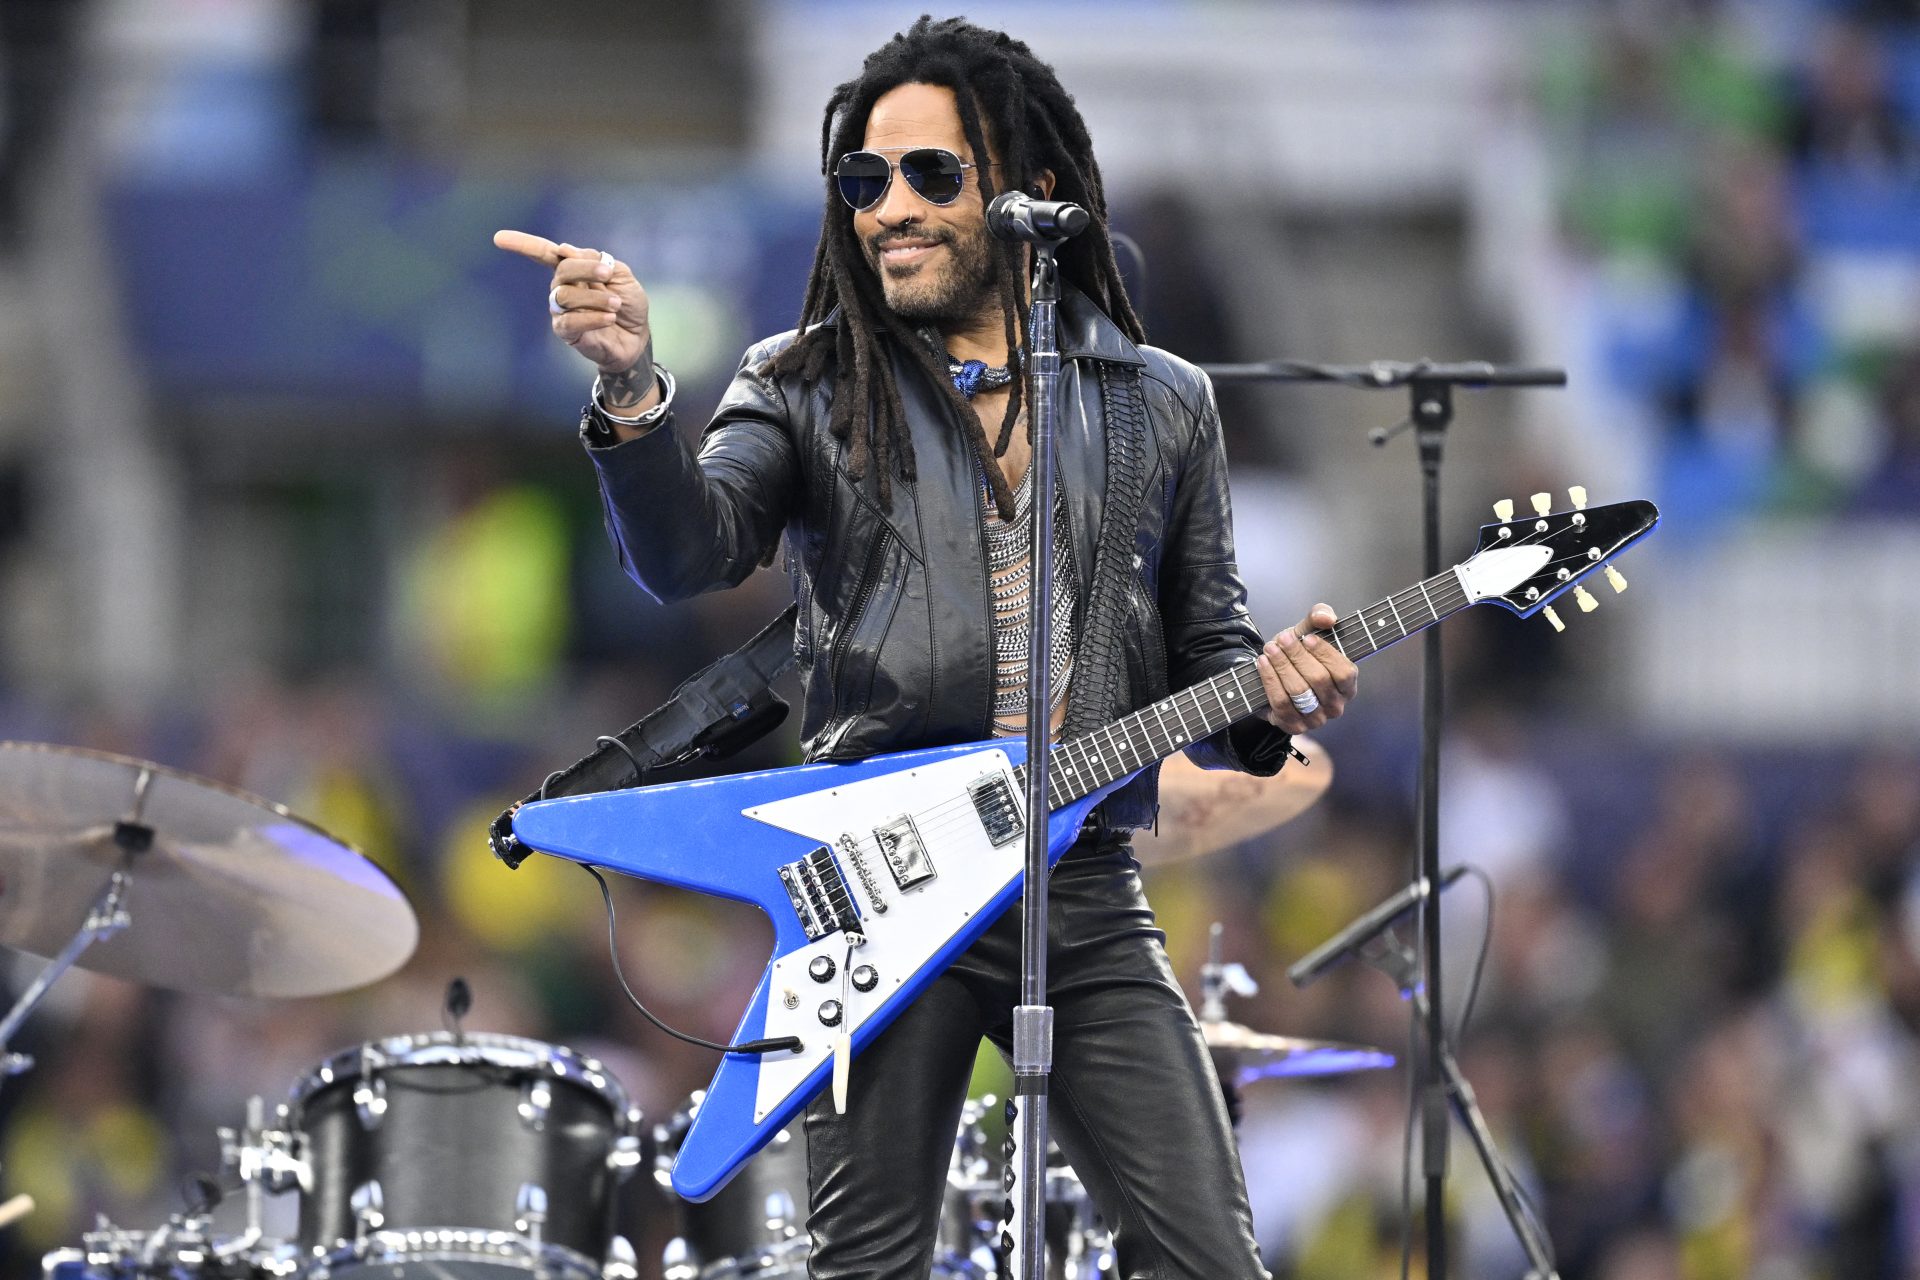 Lenny Kravitz plays Champions League - see how he stays in shape at 60!